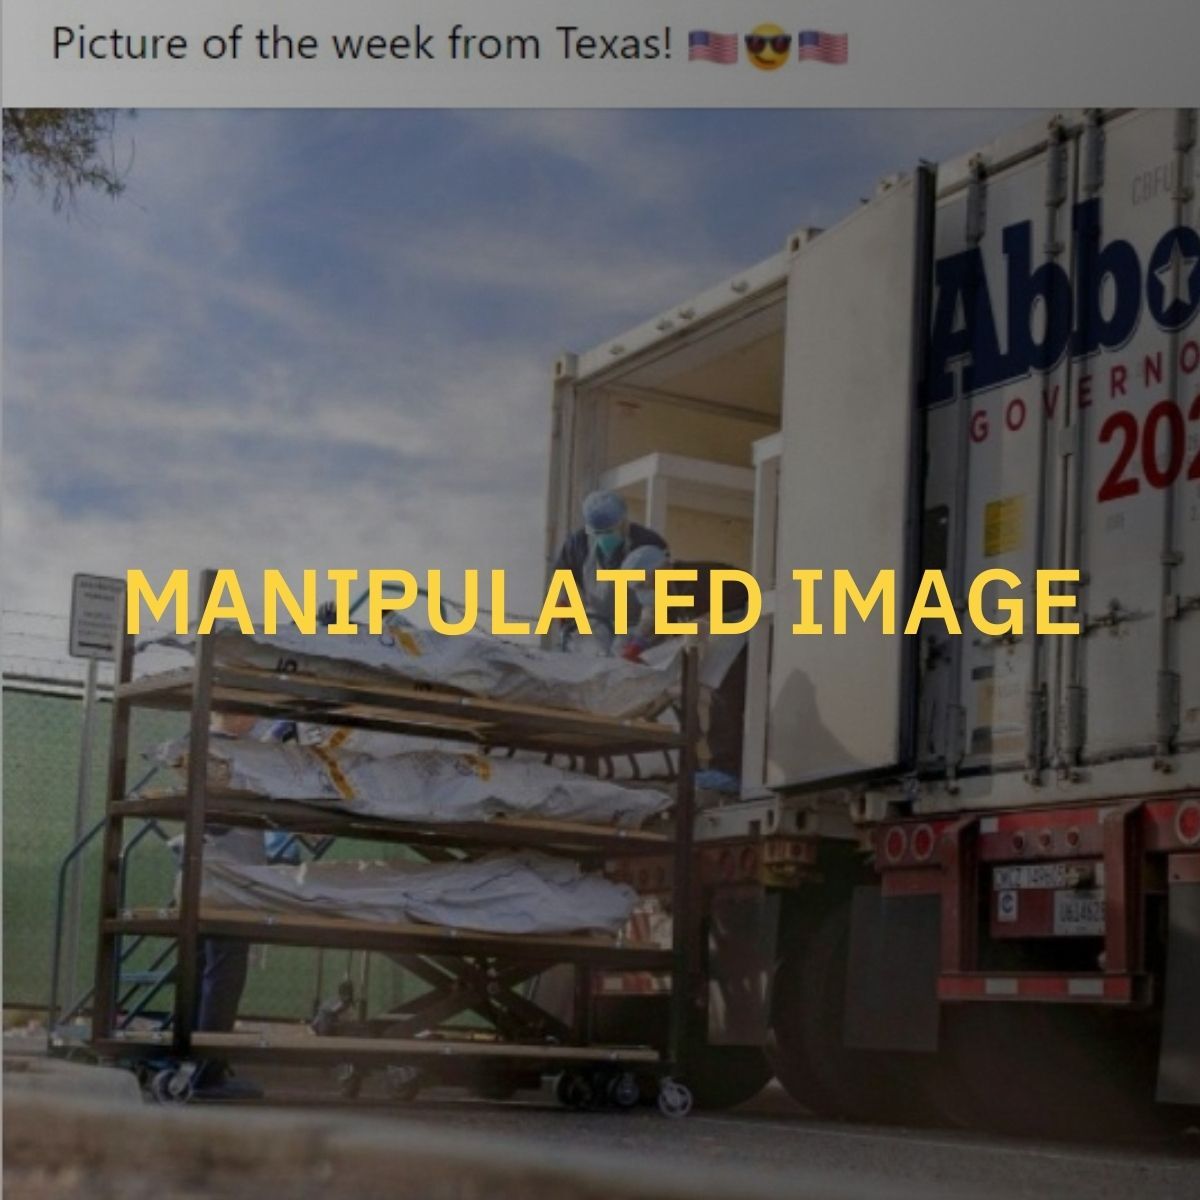 Body bags transported in Gov. Abbot campaign truck (manipulated image)